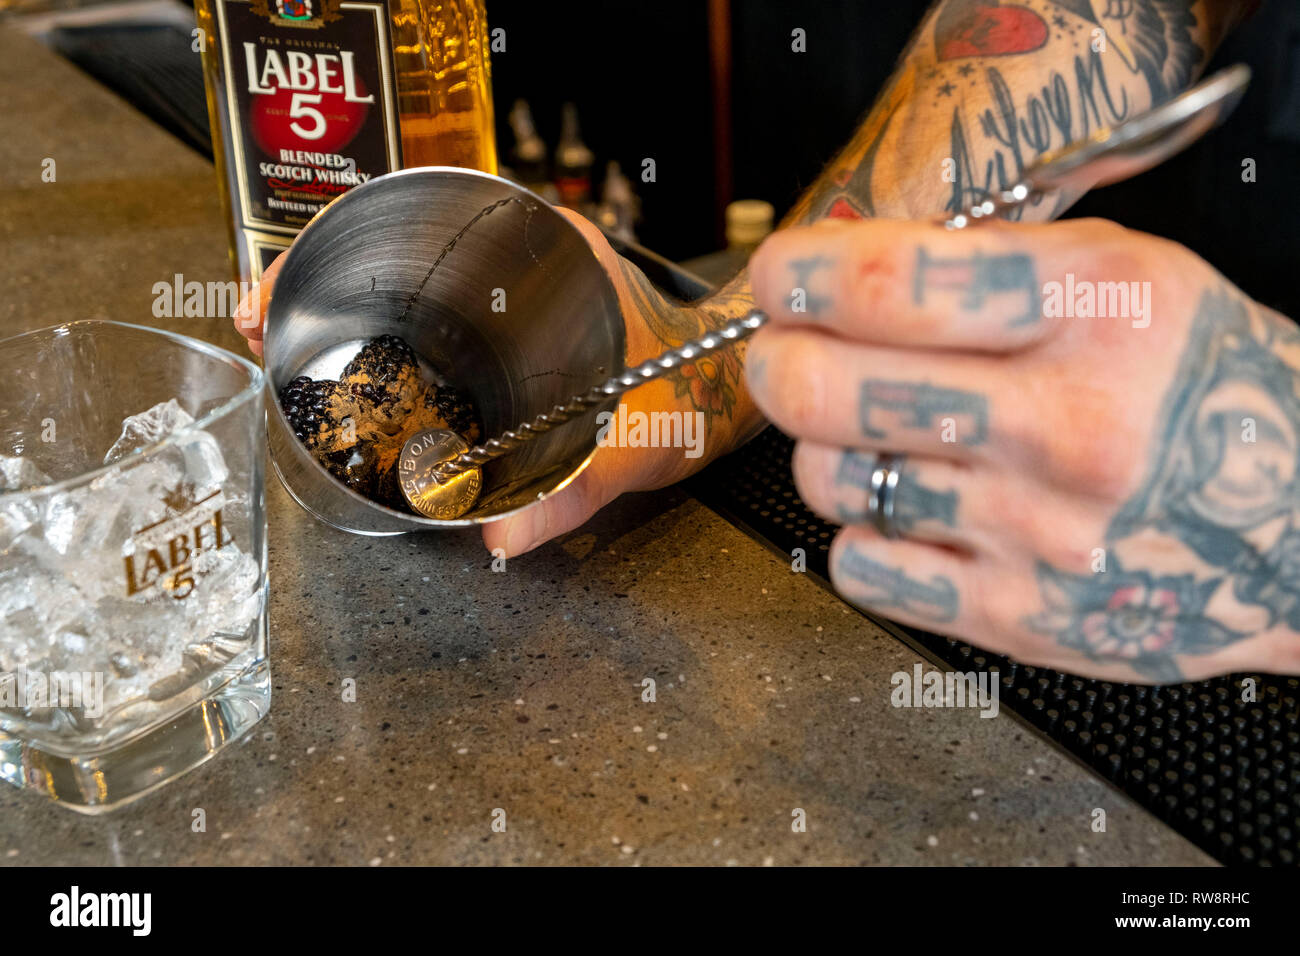 Whisky Cocktail being made by barman Stock Photo